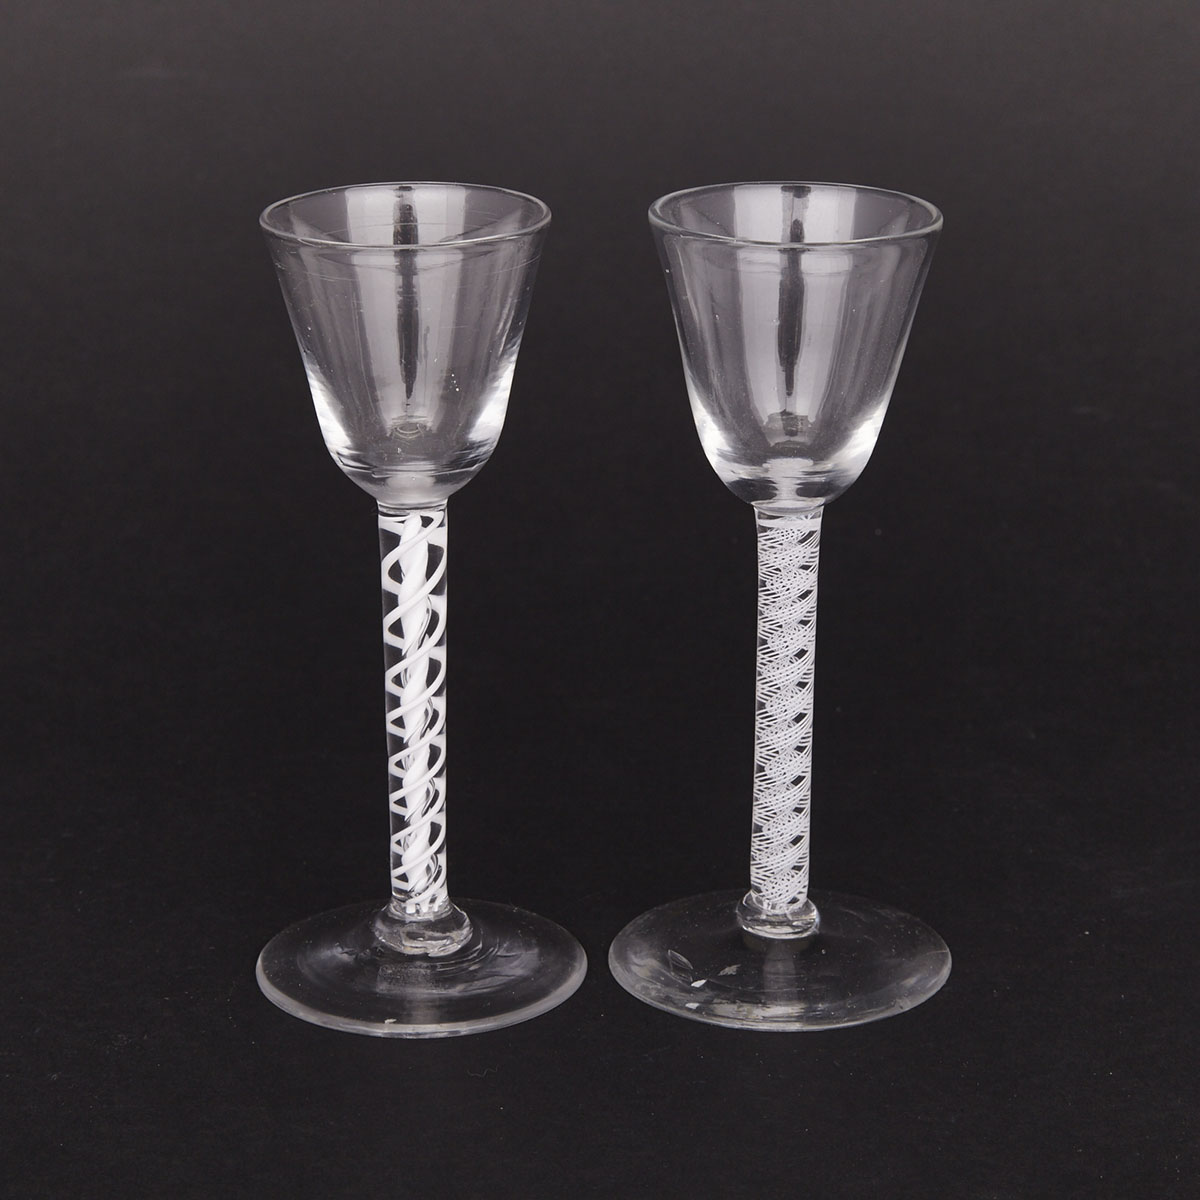 Two English Opaque Twist Stemmed Wine Glasses, 18th century